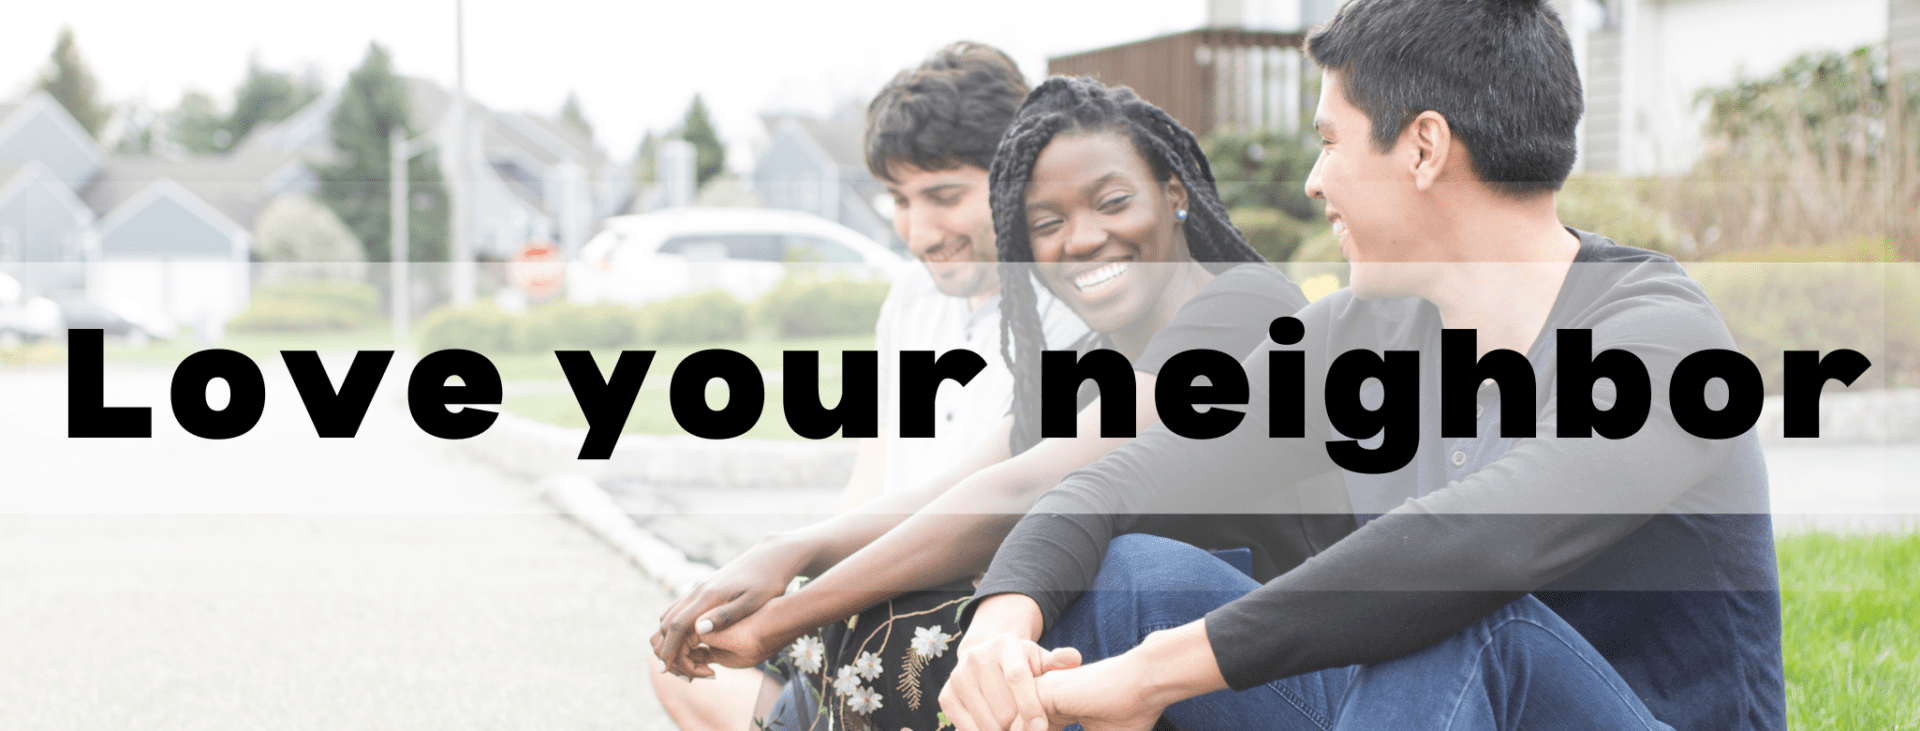 Love Your Neighbor header teens sitting on a curb together